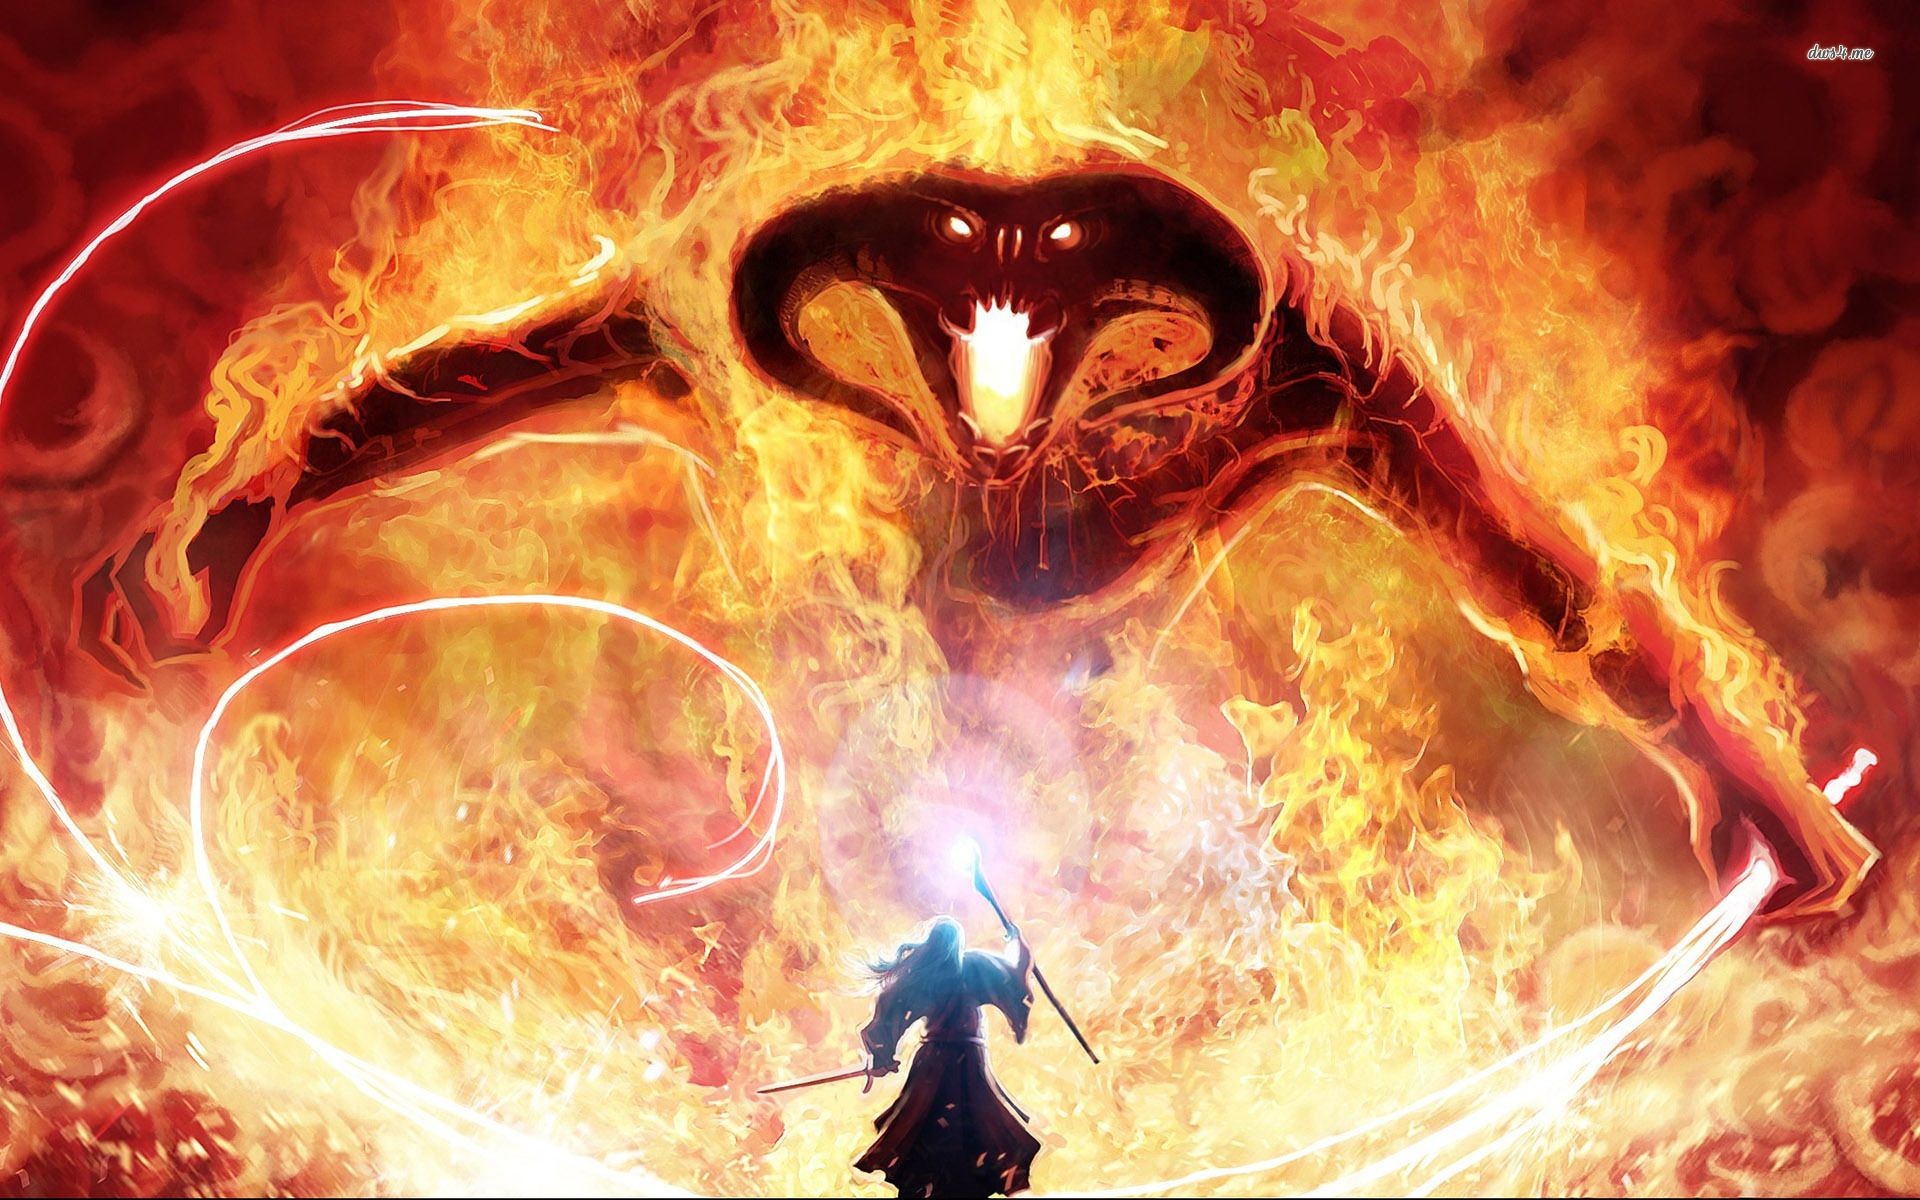 1920x1200 Gandalg and Balrog - Lord Of The Rings wallpaper